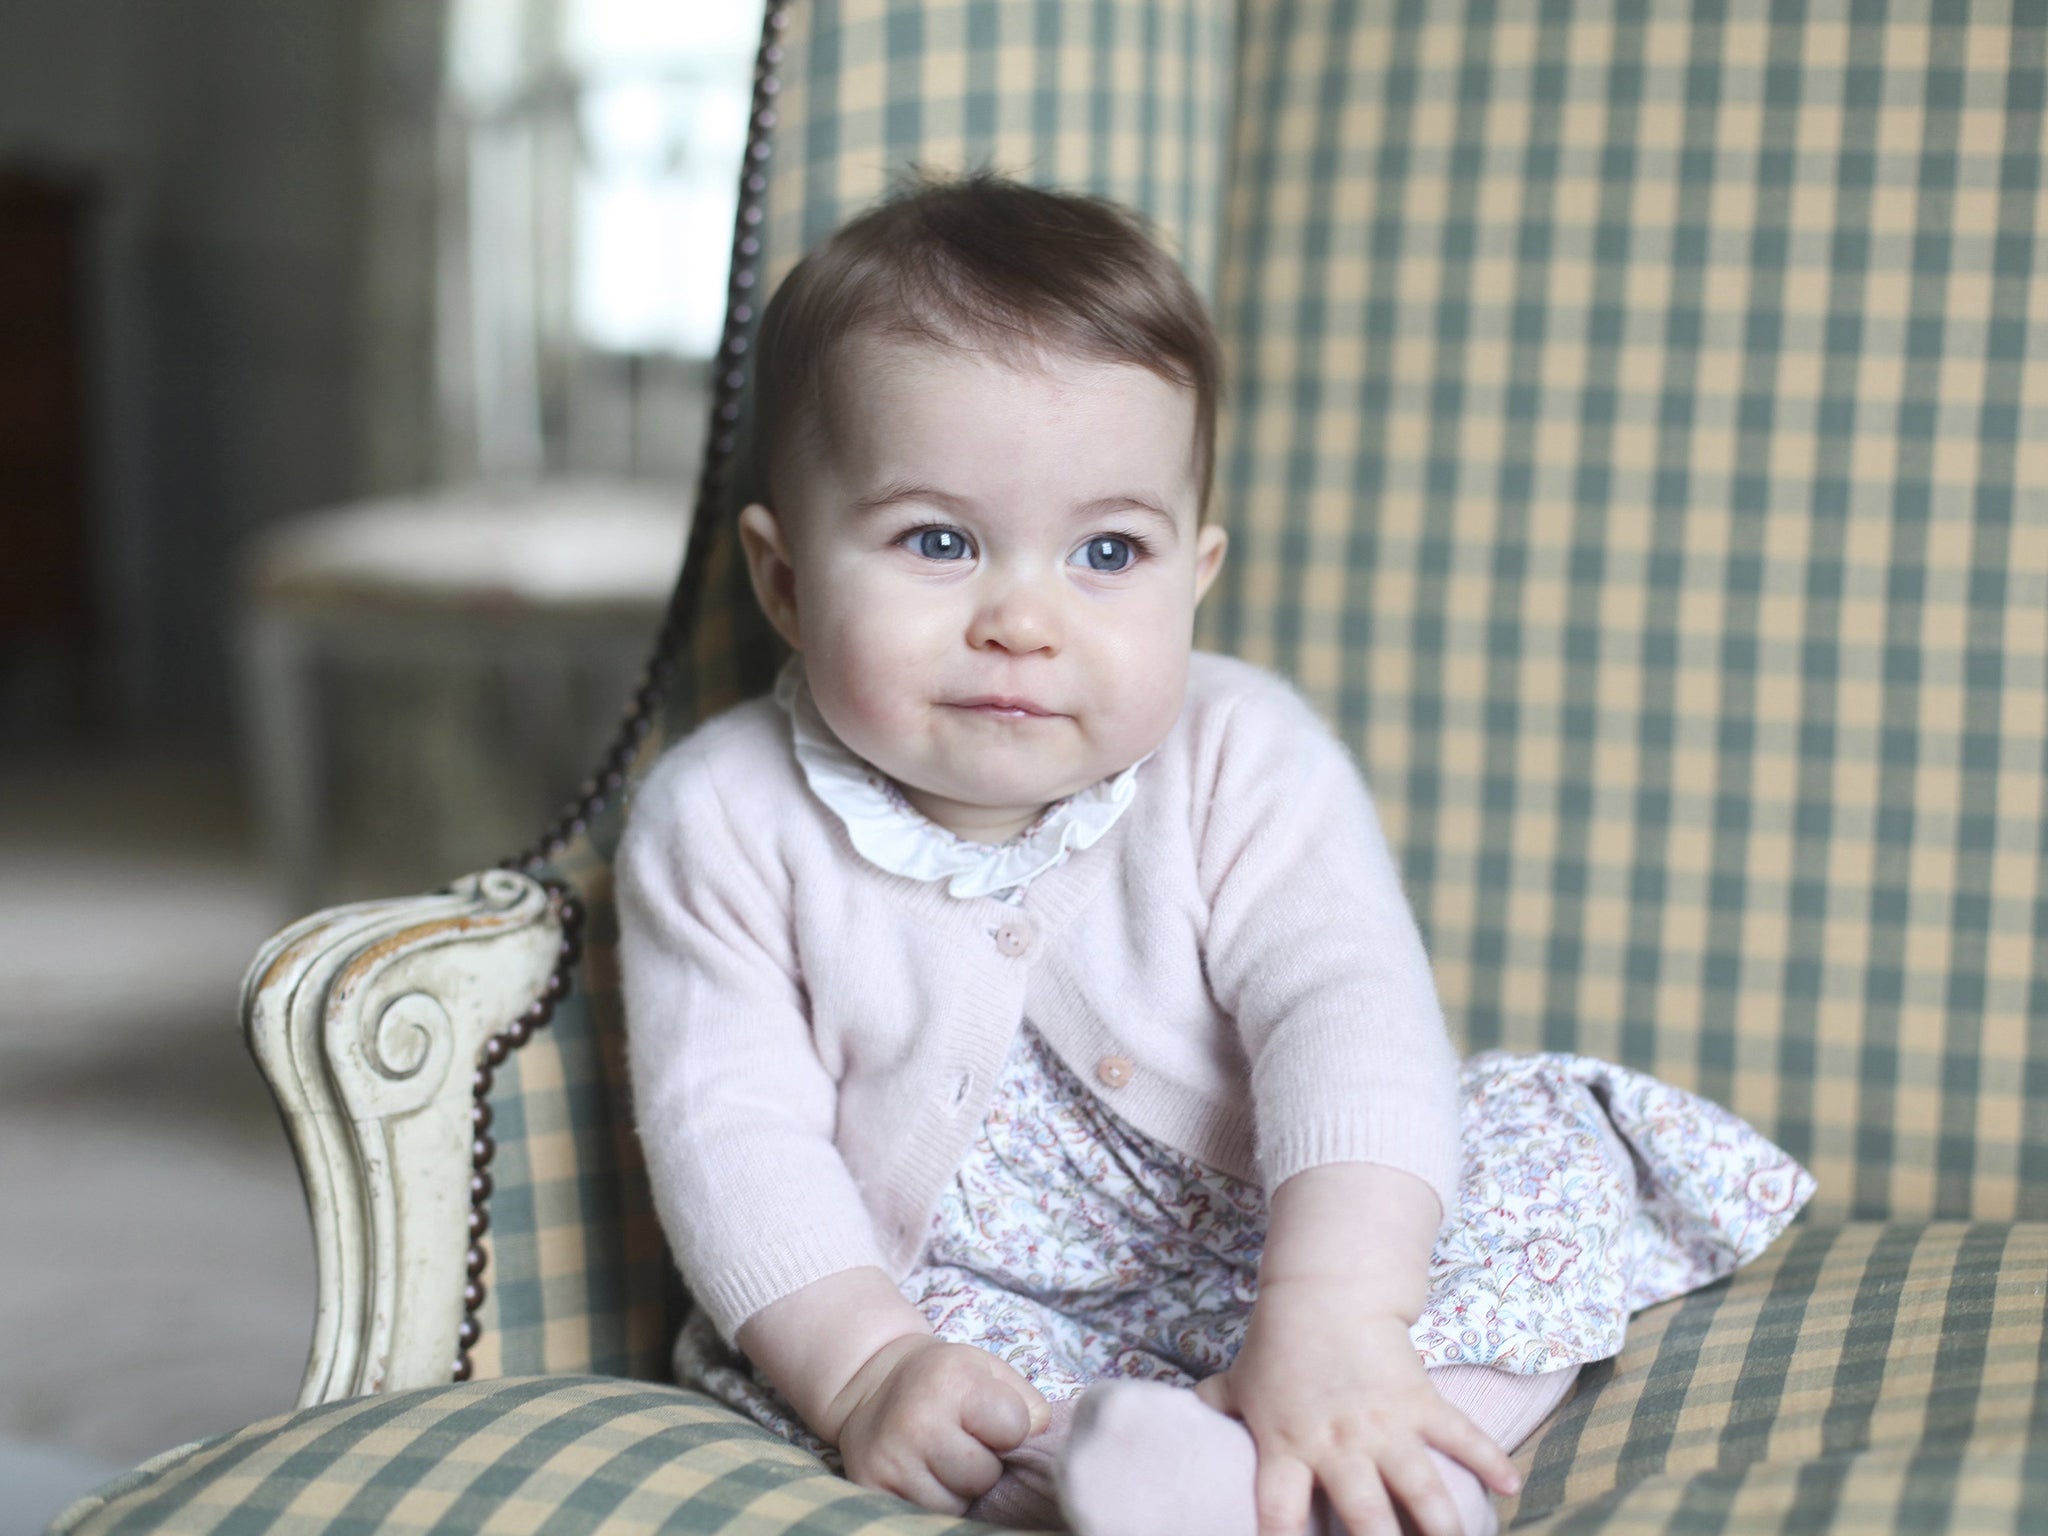 &#13;
Princess Charlotte photographed by her mother Catherine, Duchess of Cambridge, at Anmer Hall in Sandringham&#13;